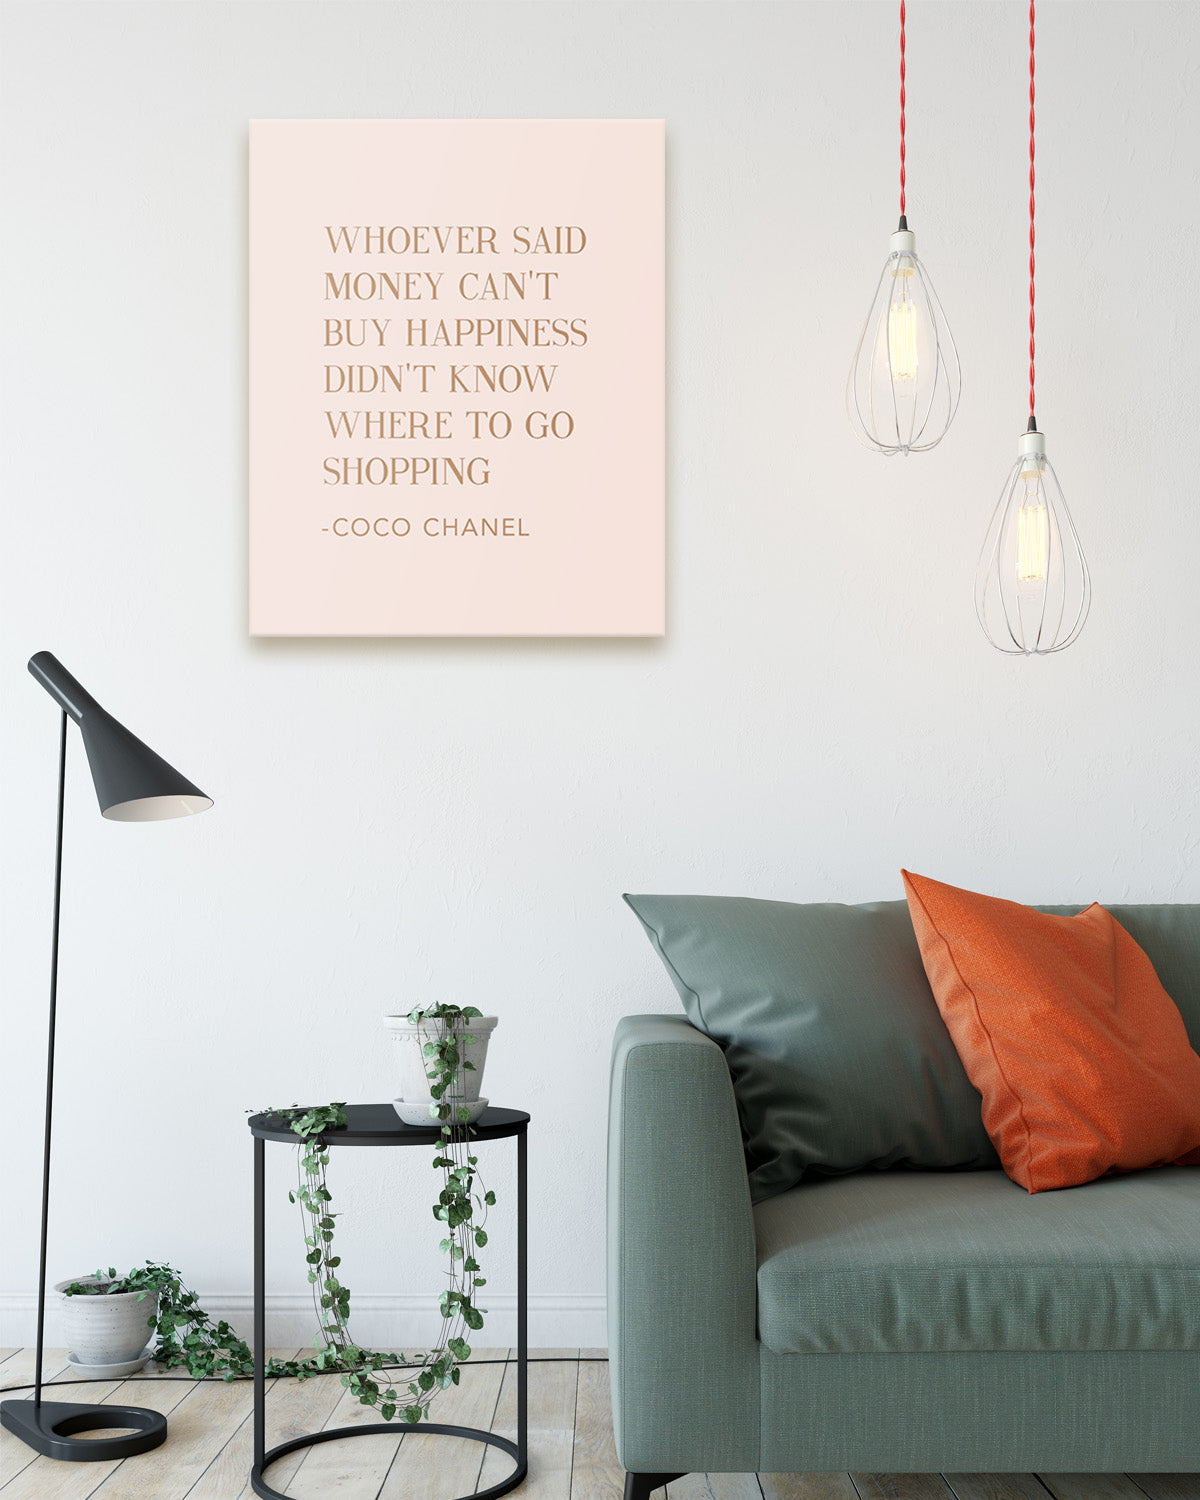 Shopping Lover Quote by Coco Chanel - Fashion Wall Decor for Vanity or Closet - Closet Wall Art - Fashion Design Glamour Wall Art For Women, Teens, Girls